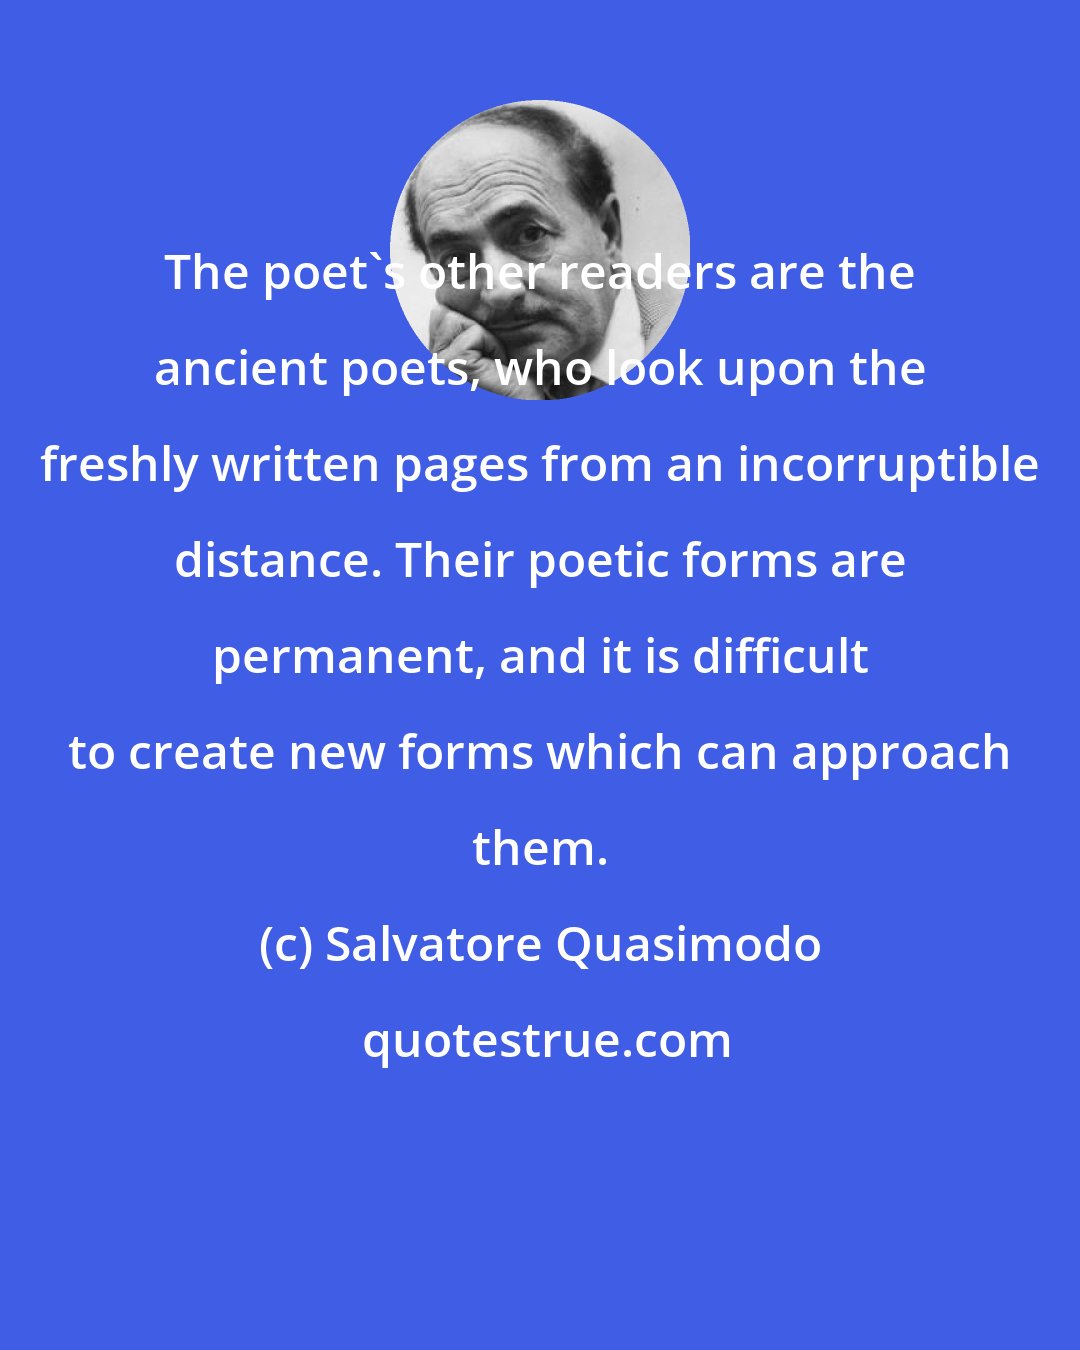 Salvatore Quasimodo: The poet's other readers are the ancient poets, who look upon the freshly written pages from an incorruptible distance. Their poetic forms are permanent, and it is difficult to create new forms which can approach them.